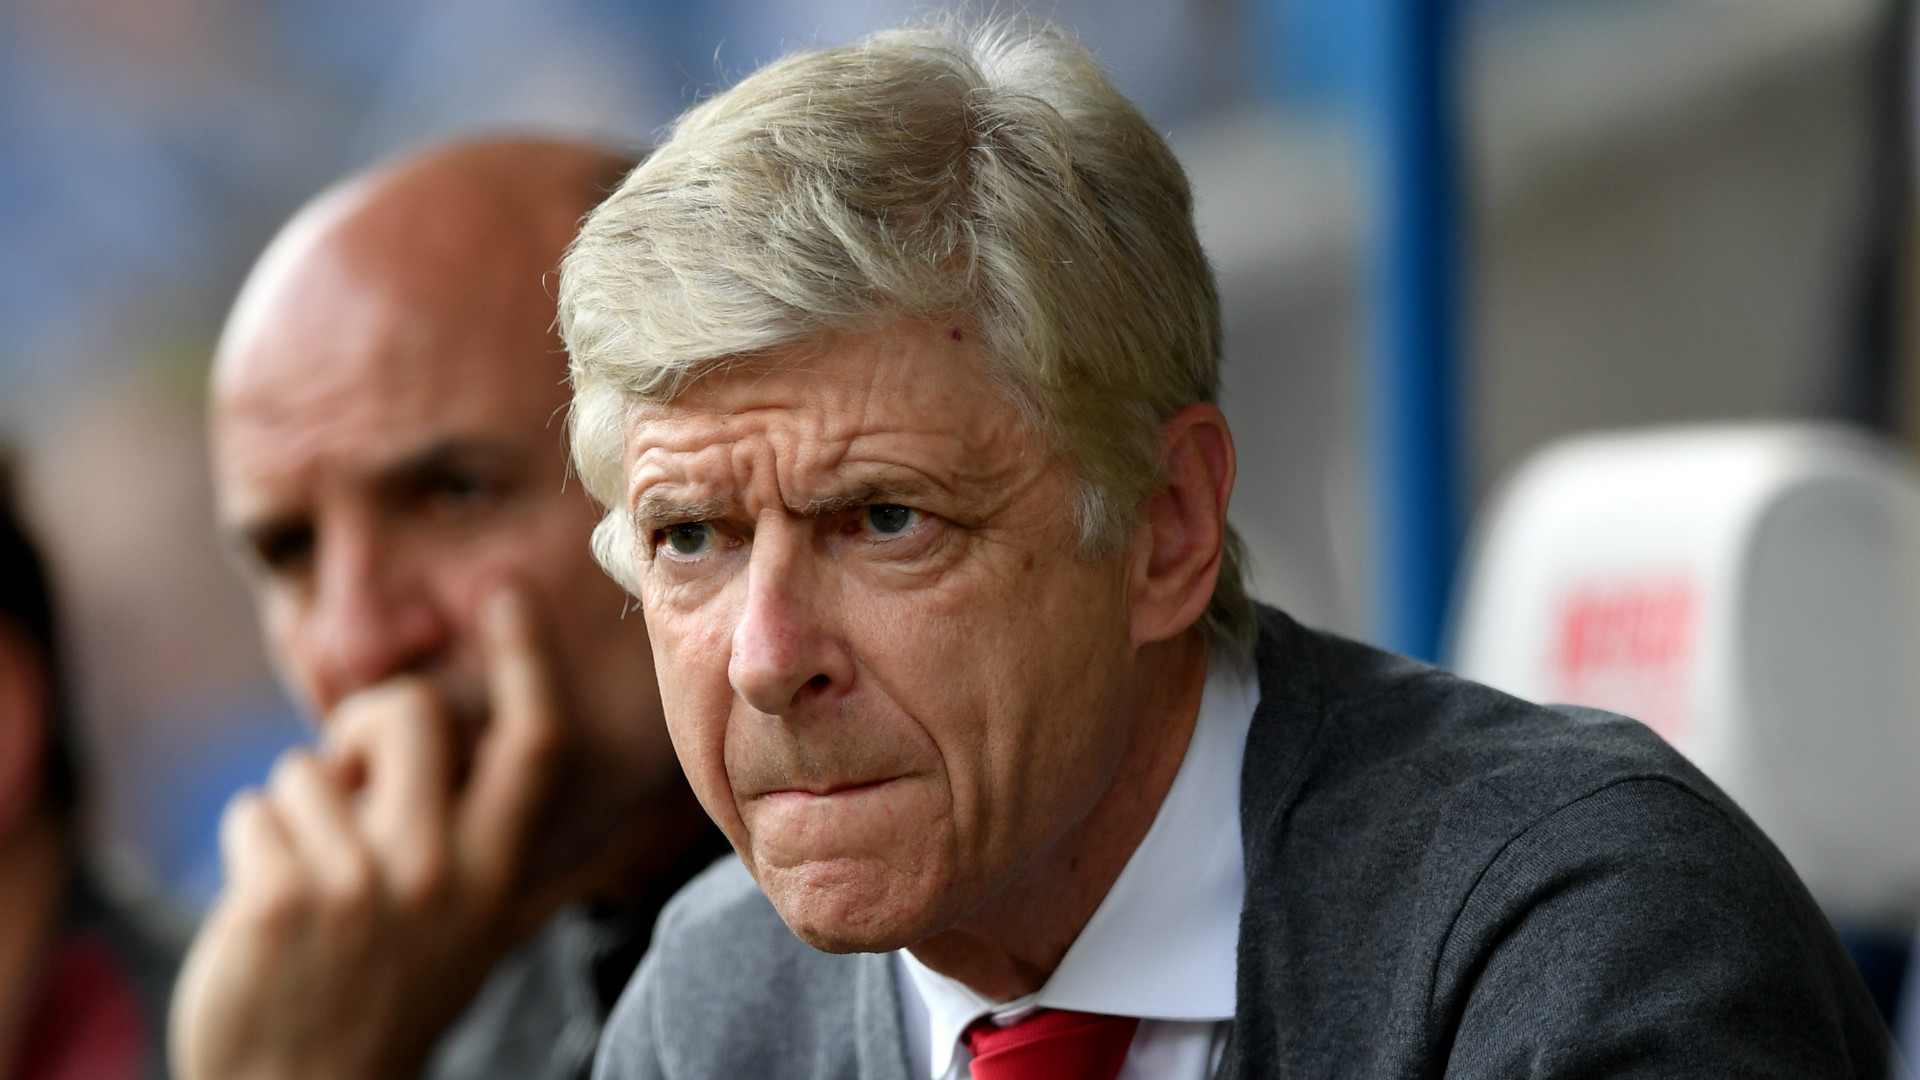 Bergkamp admits to doubting Wenger when Arsenal brought in unknown coach from Japan